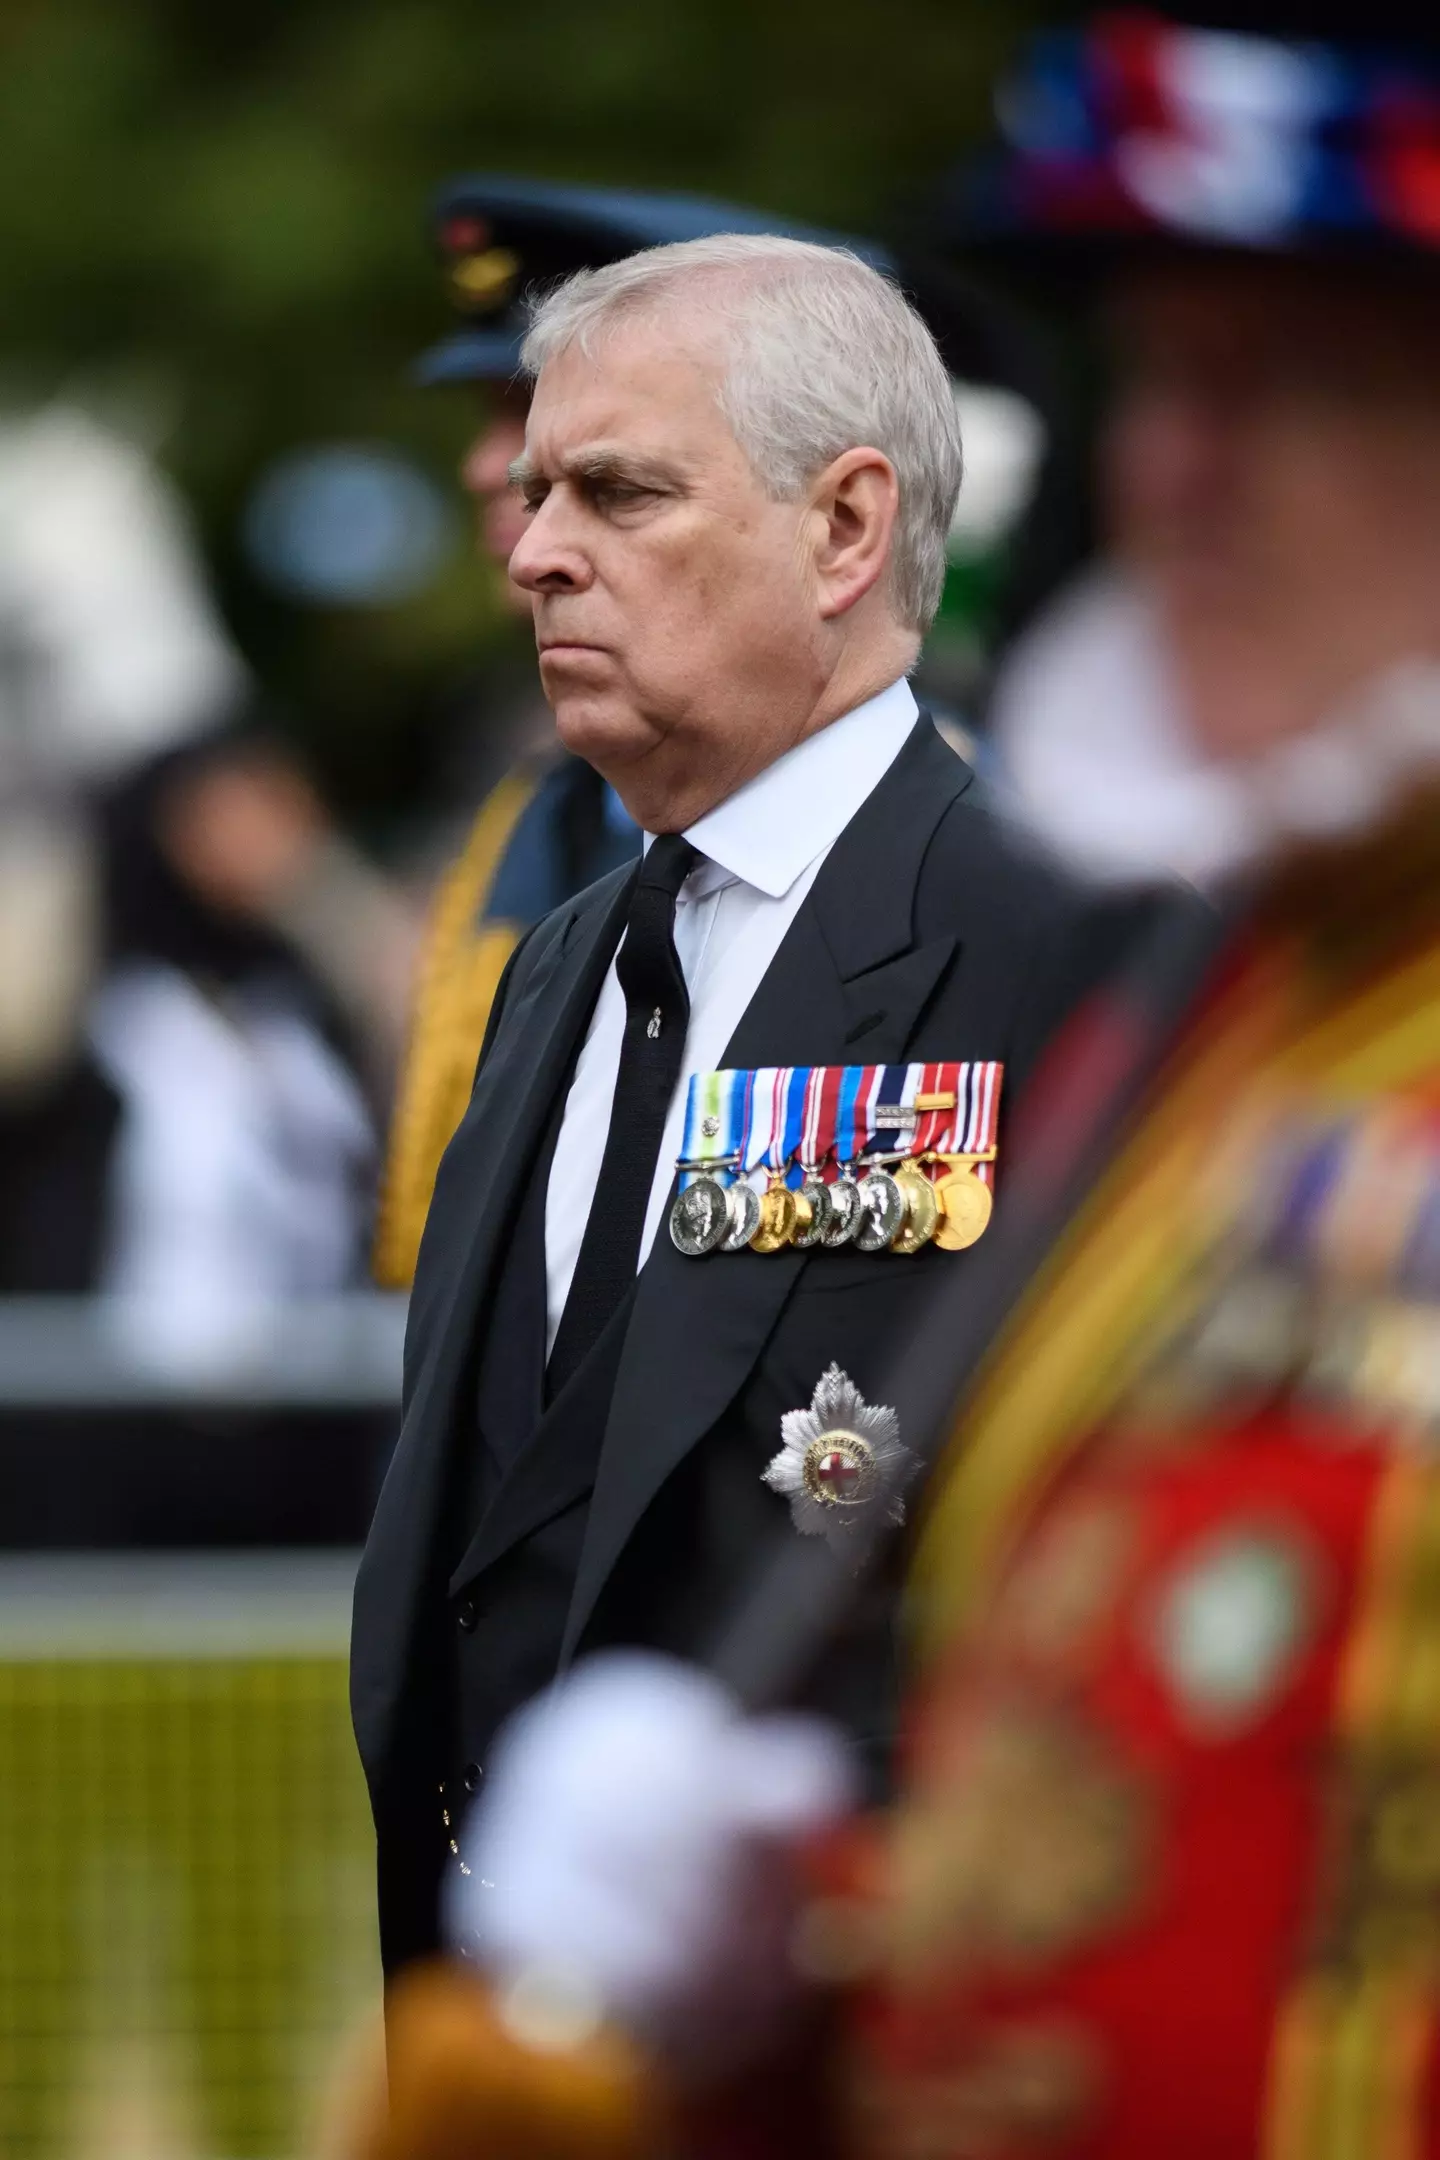 Prince Andrew denies all allegations against him.